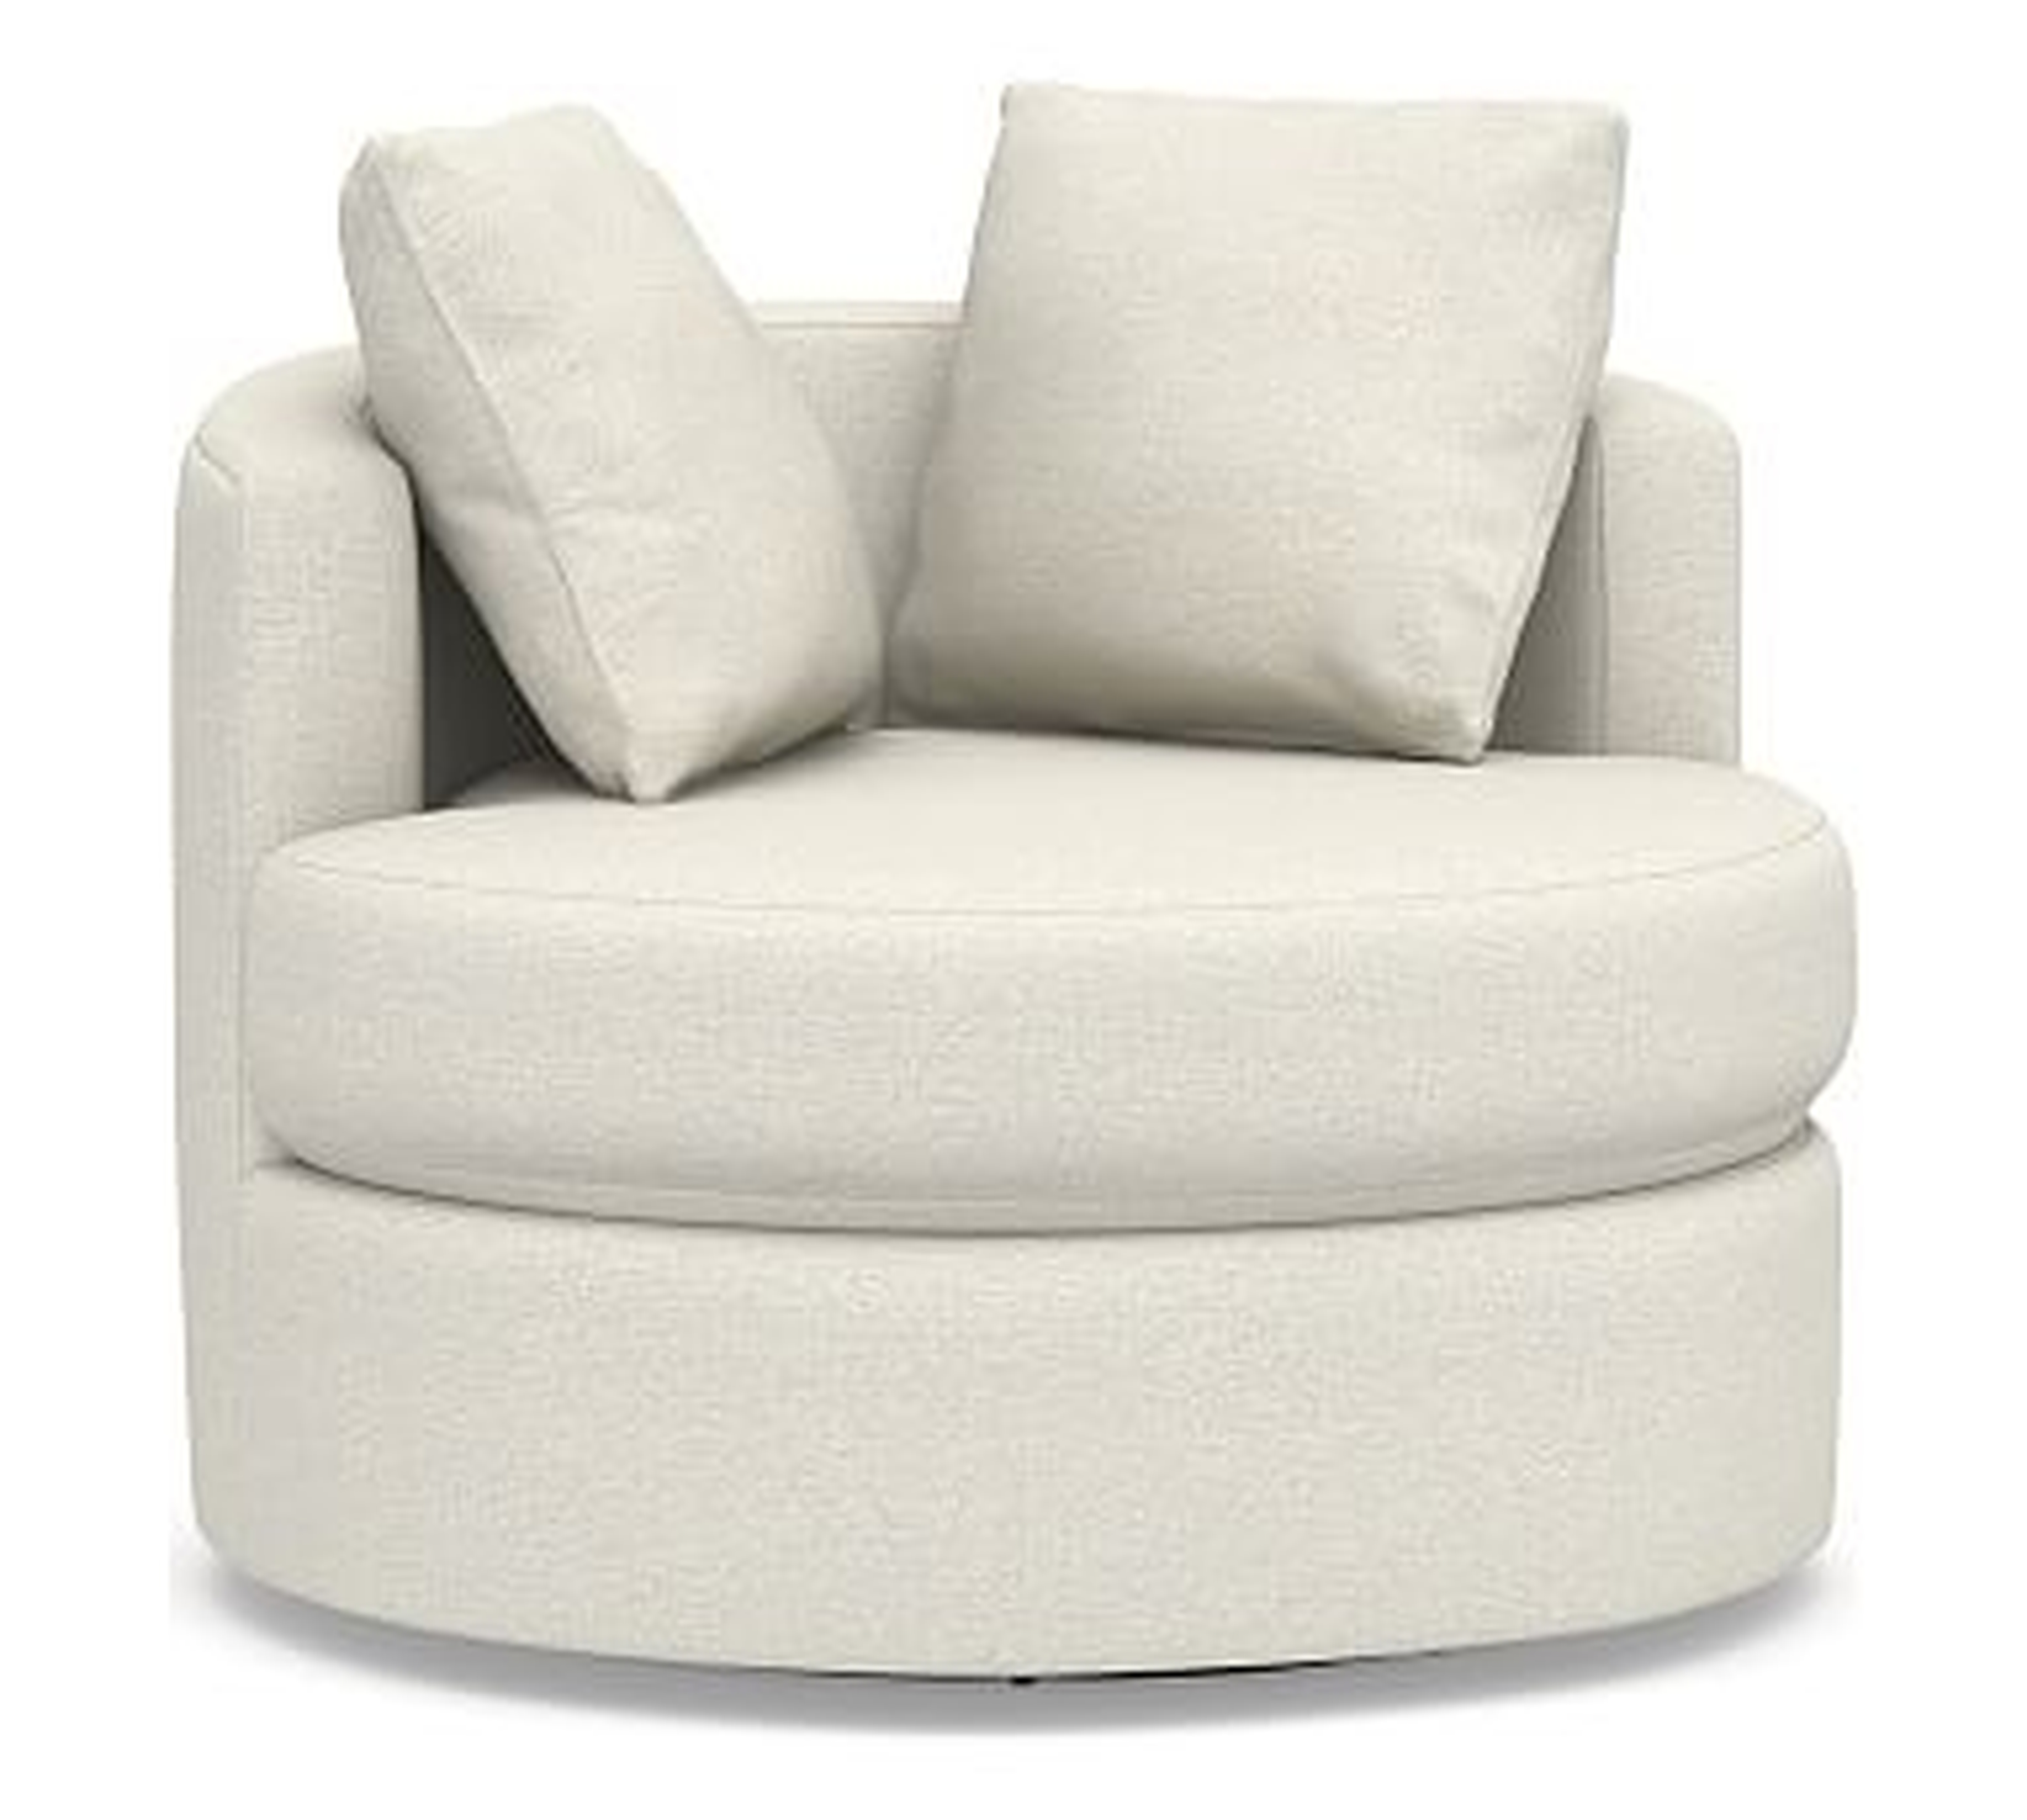 Balboa Upholstered Swivel Armchair, Polyester Wrapped Cushions, Performance Boucle Oatmeal - Pottery Barn